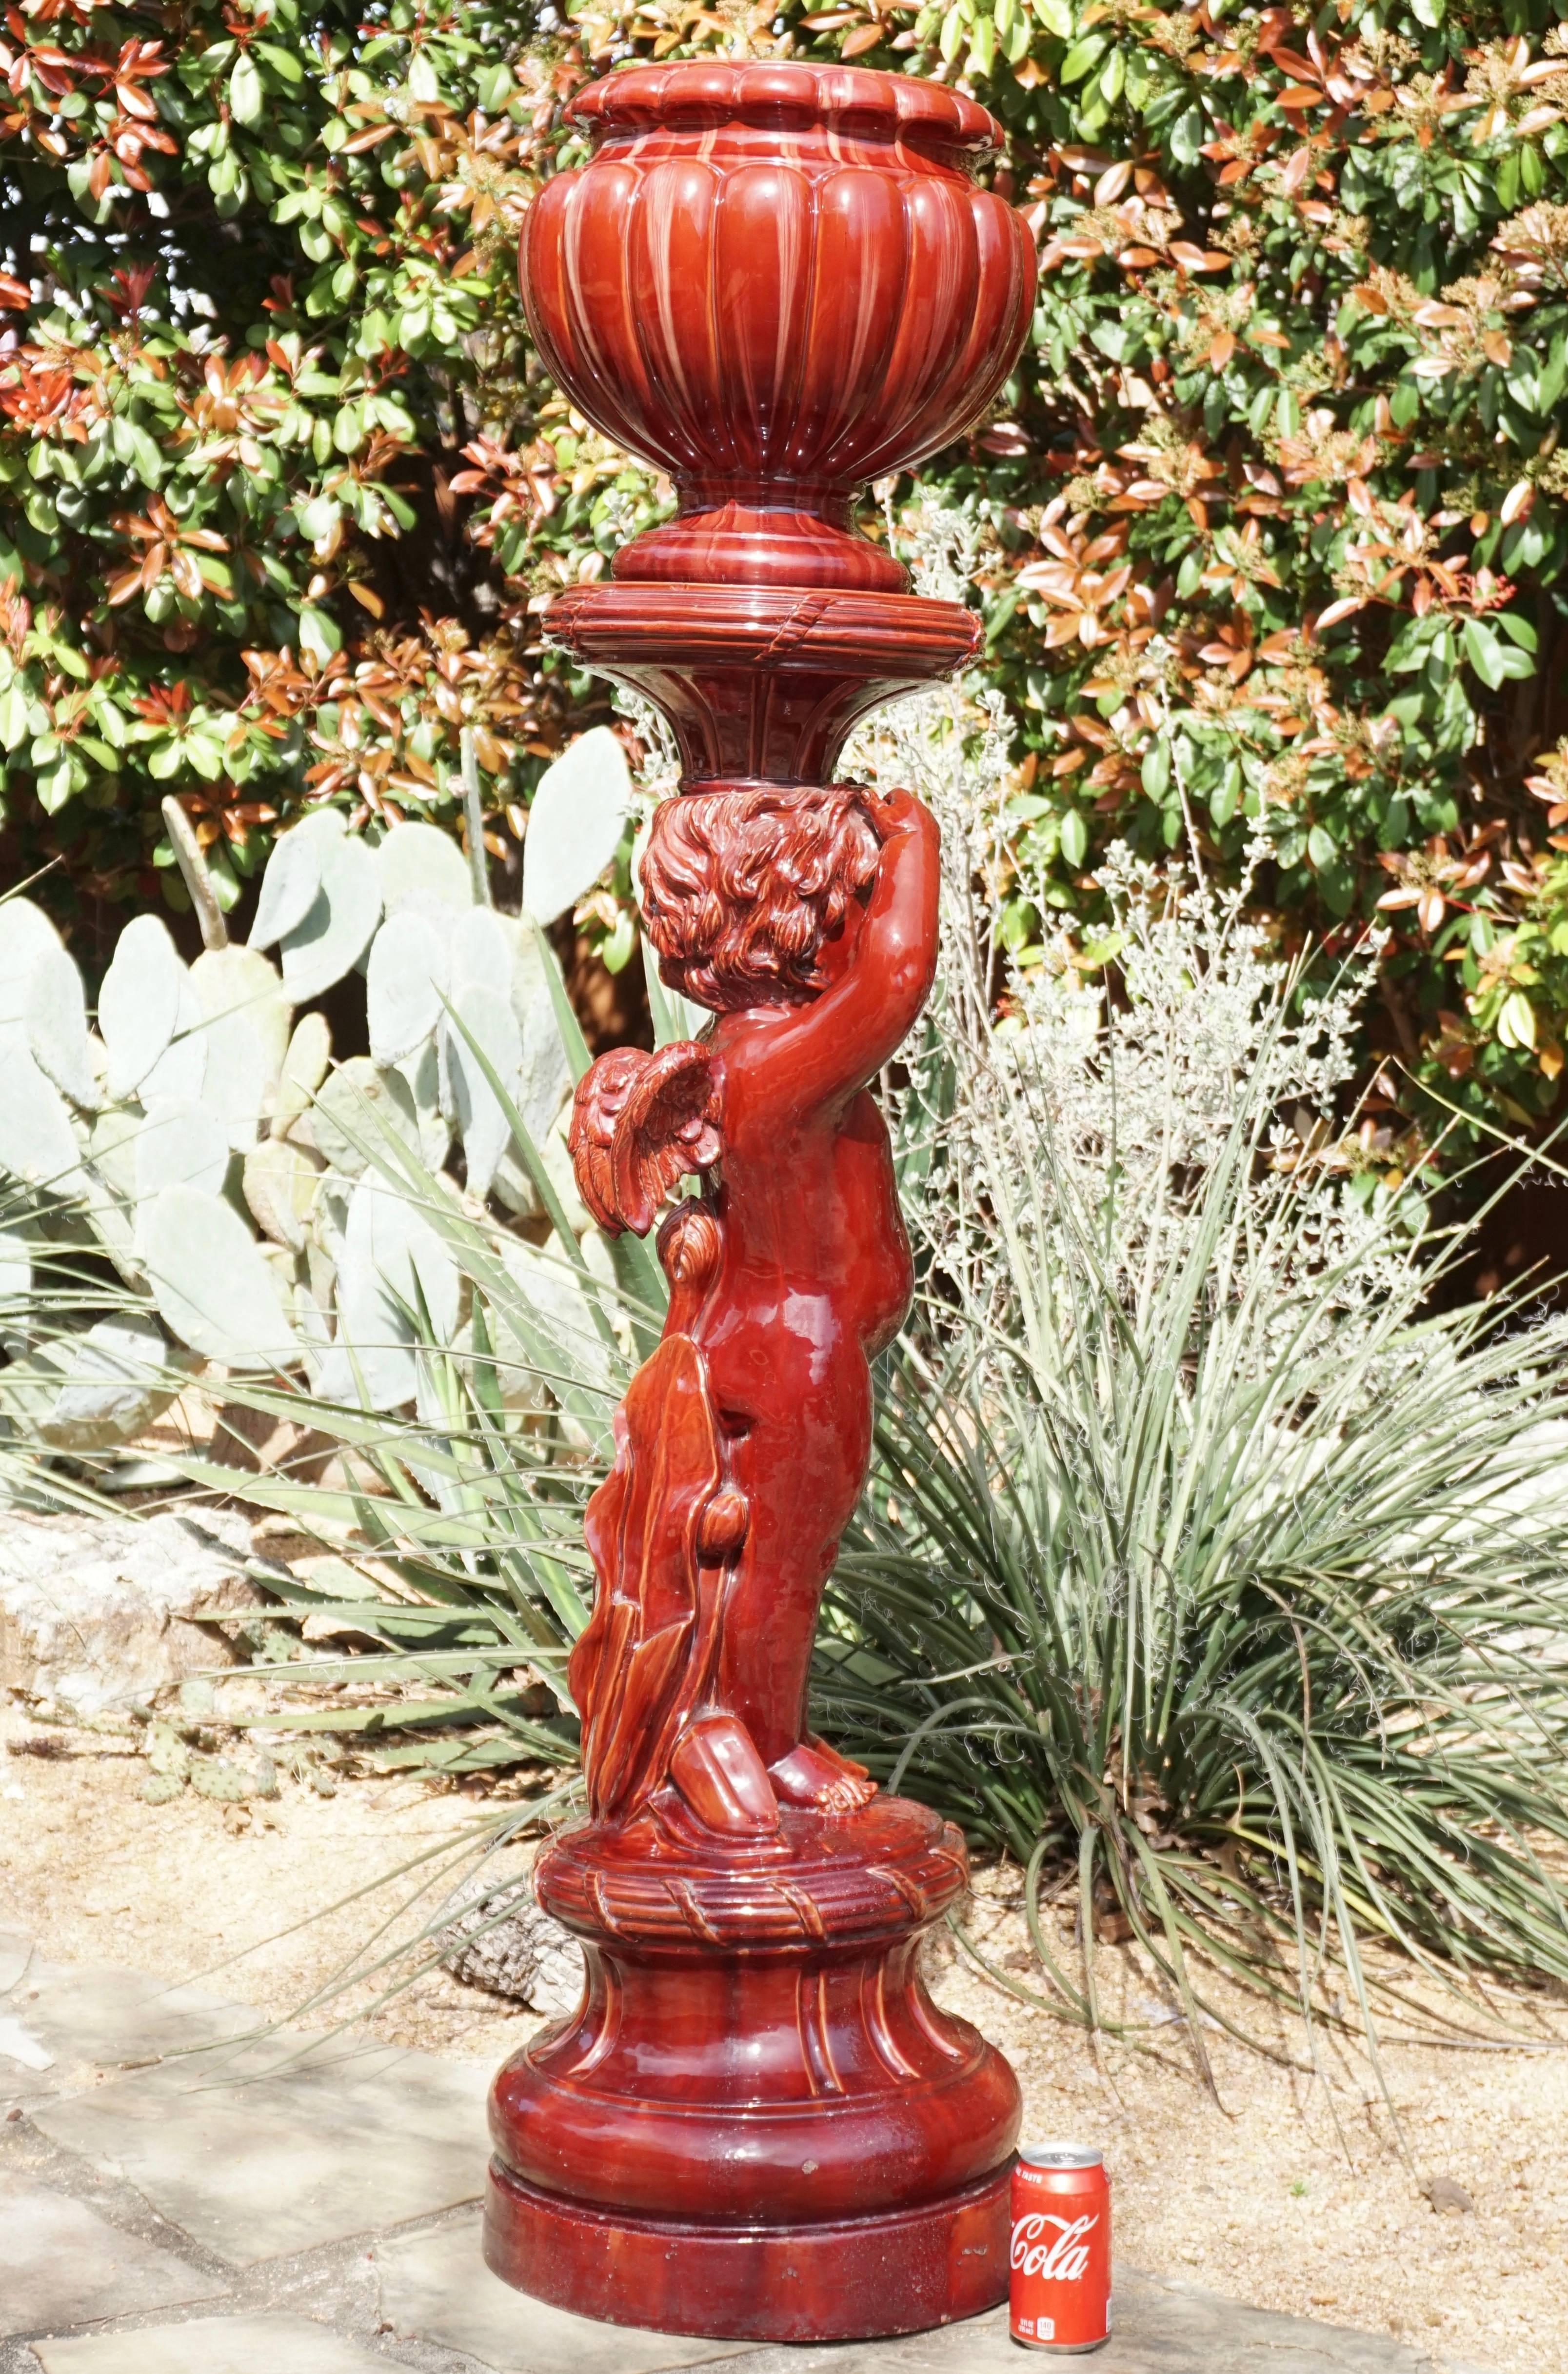 A tall circa 1900 or earlier glazed redware ox blood Majolica jardinière and pedestal representing a winged Putti cherub with Art Nouveau poppy design on verso. The jardinière and pedestal have striations and beauty attributed to Clement Massier